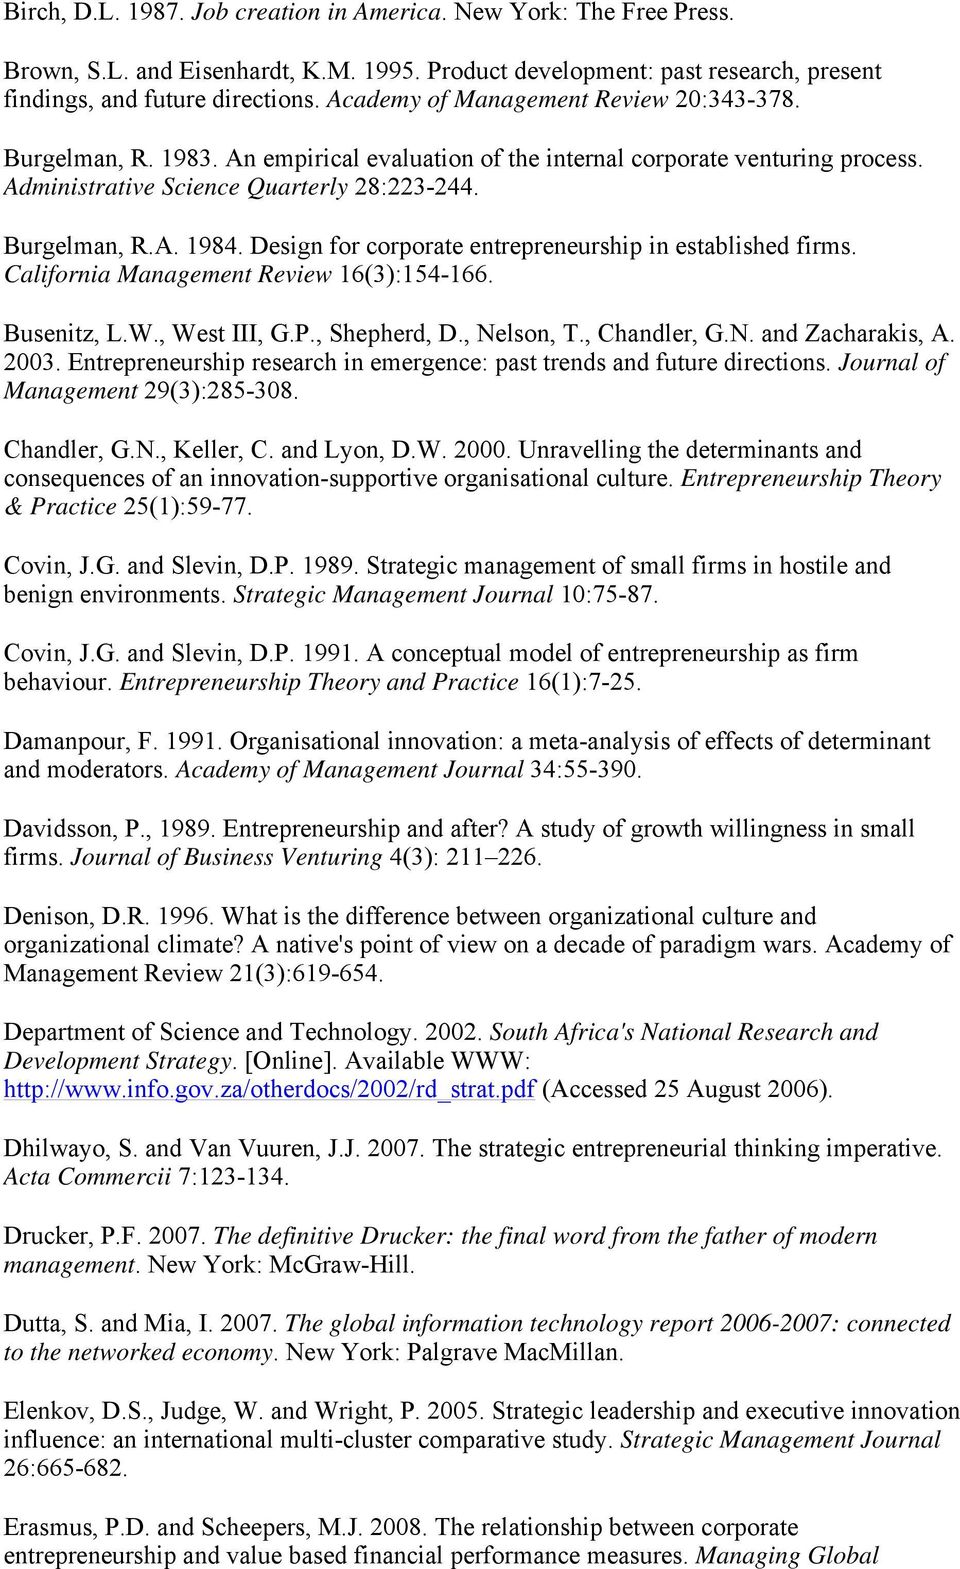 Design for corporate entrepreneurship in established firms. California Management Review 16(3):154-166. Busenitz, L.W., West III, G.P., Shepherd, D., Nelson, T., Chandler, G.N. and Zacharakis, A.